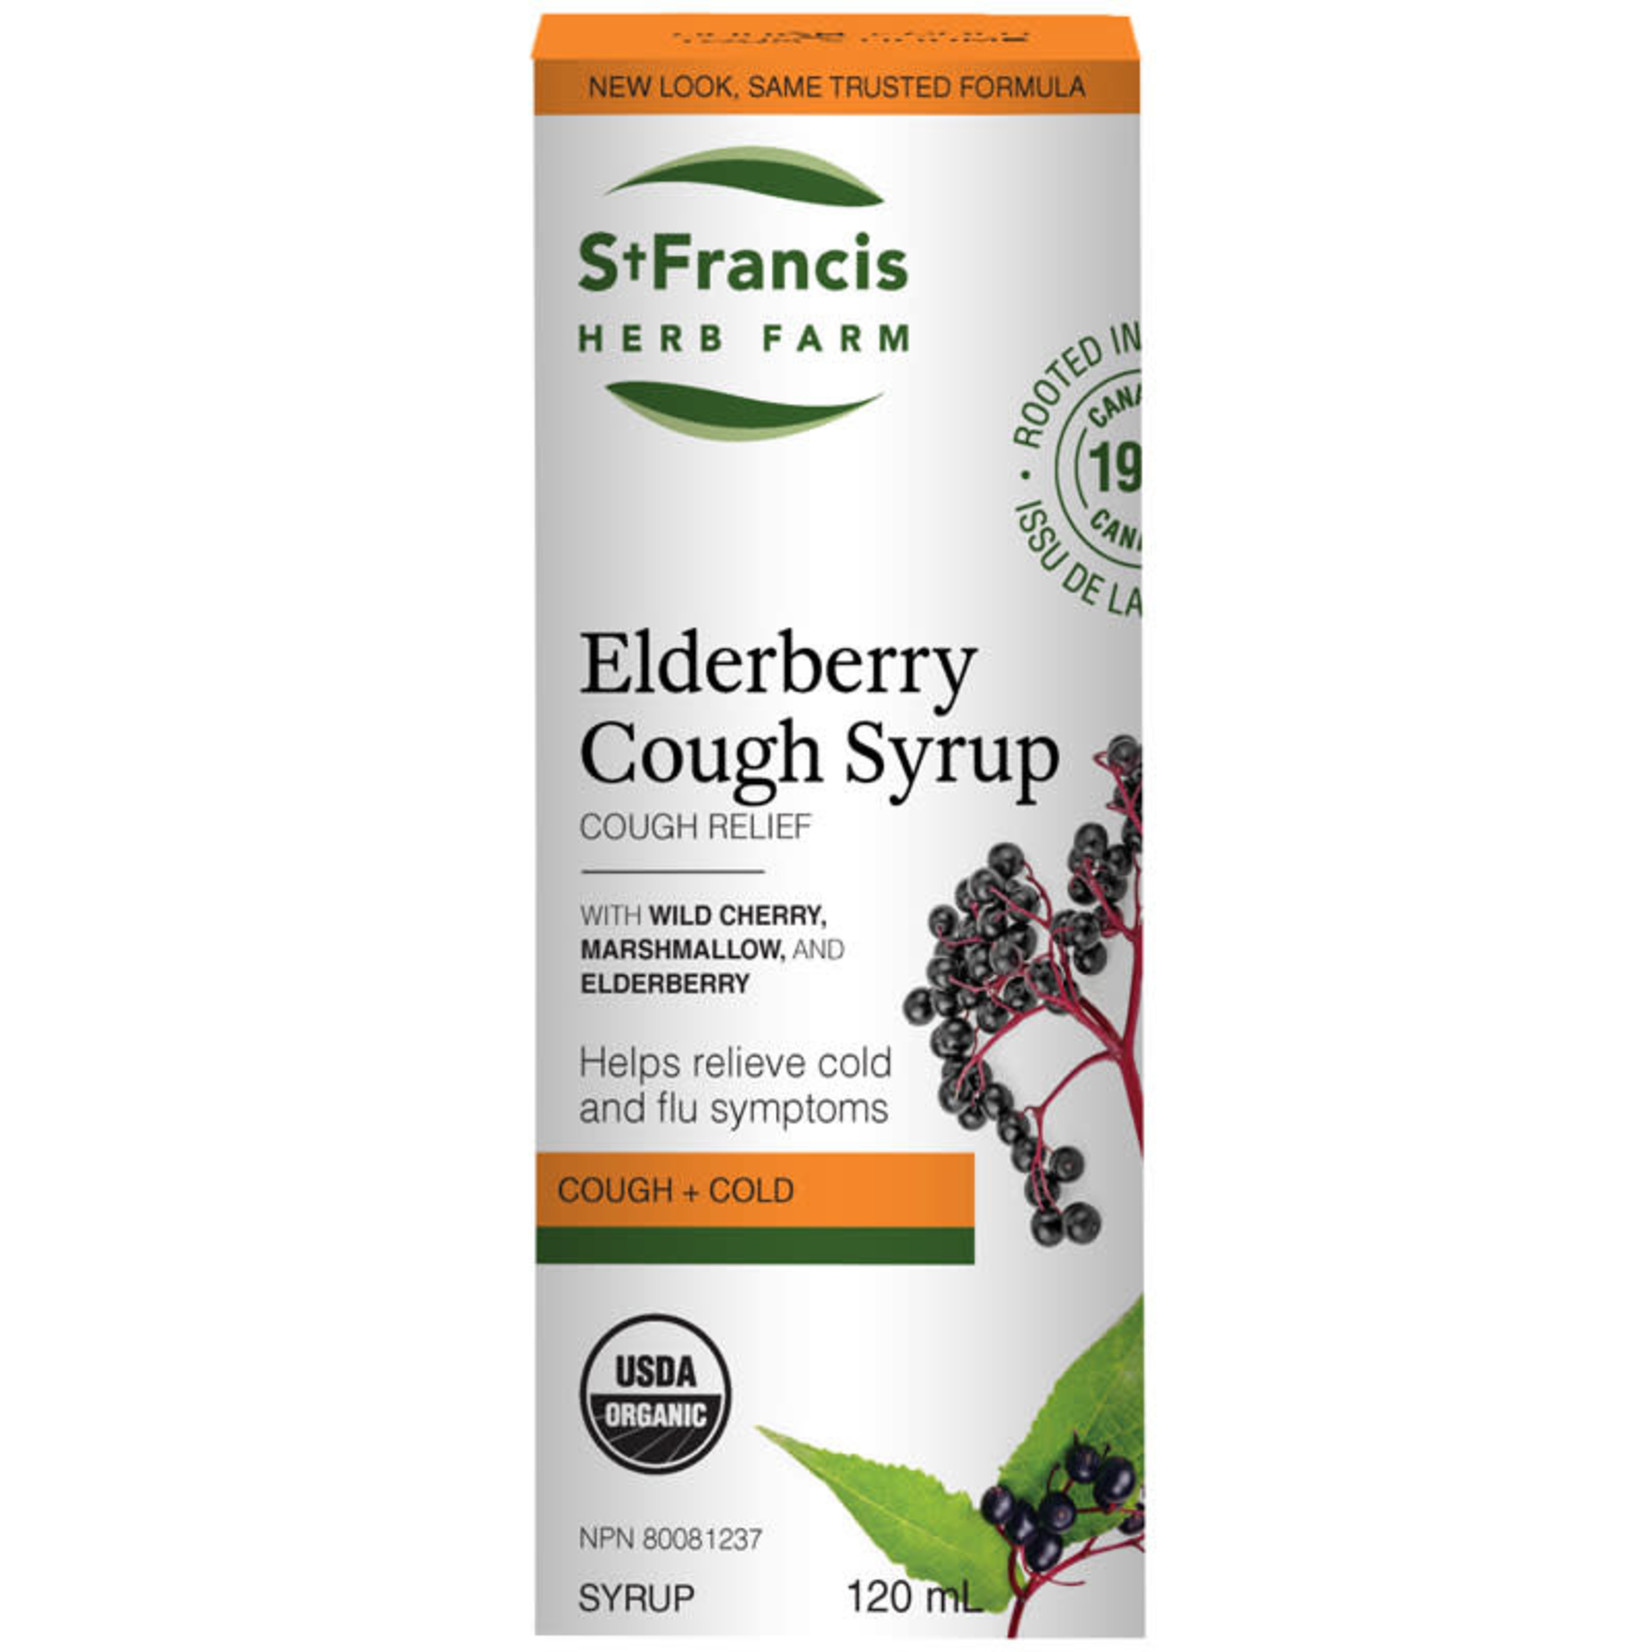 ST FRANCIS ST FRANCIS ELDERBERRY (FORMERLY STOP IT) COUGH SYRUP ADULT 120ml